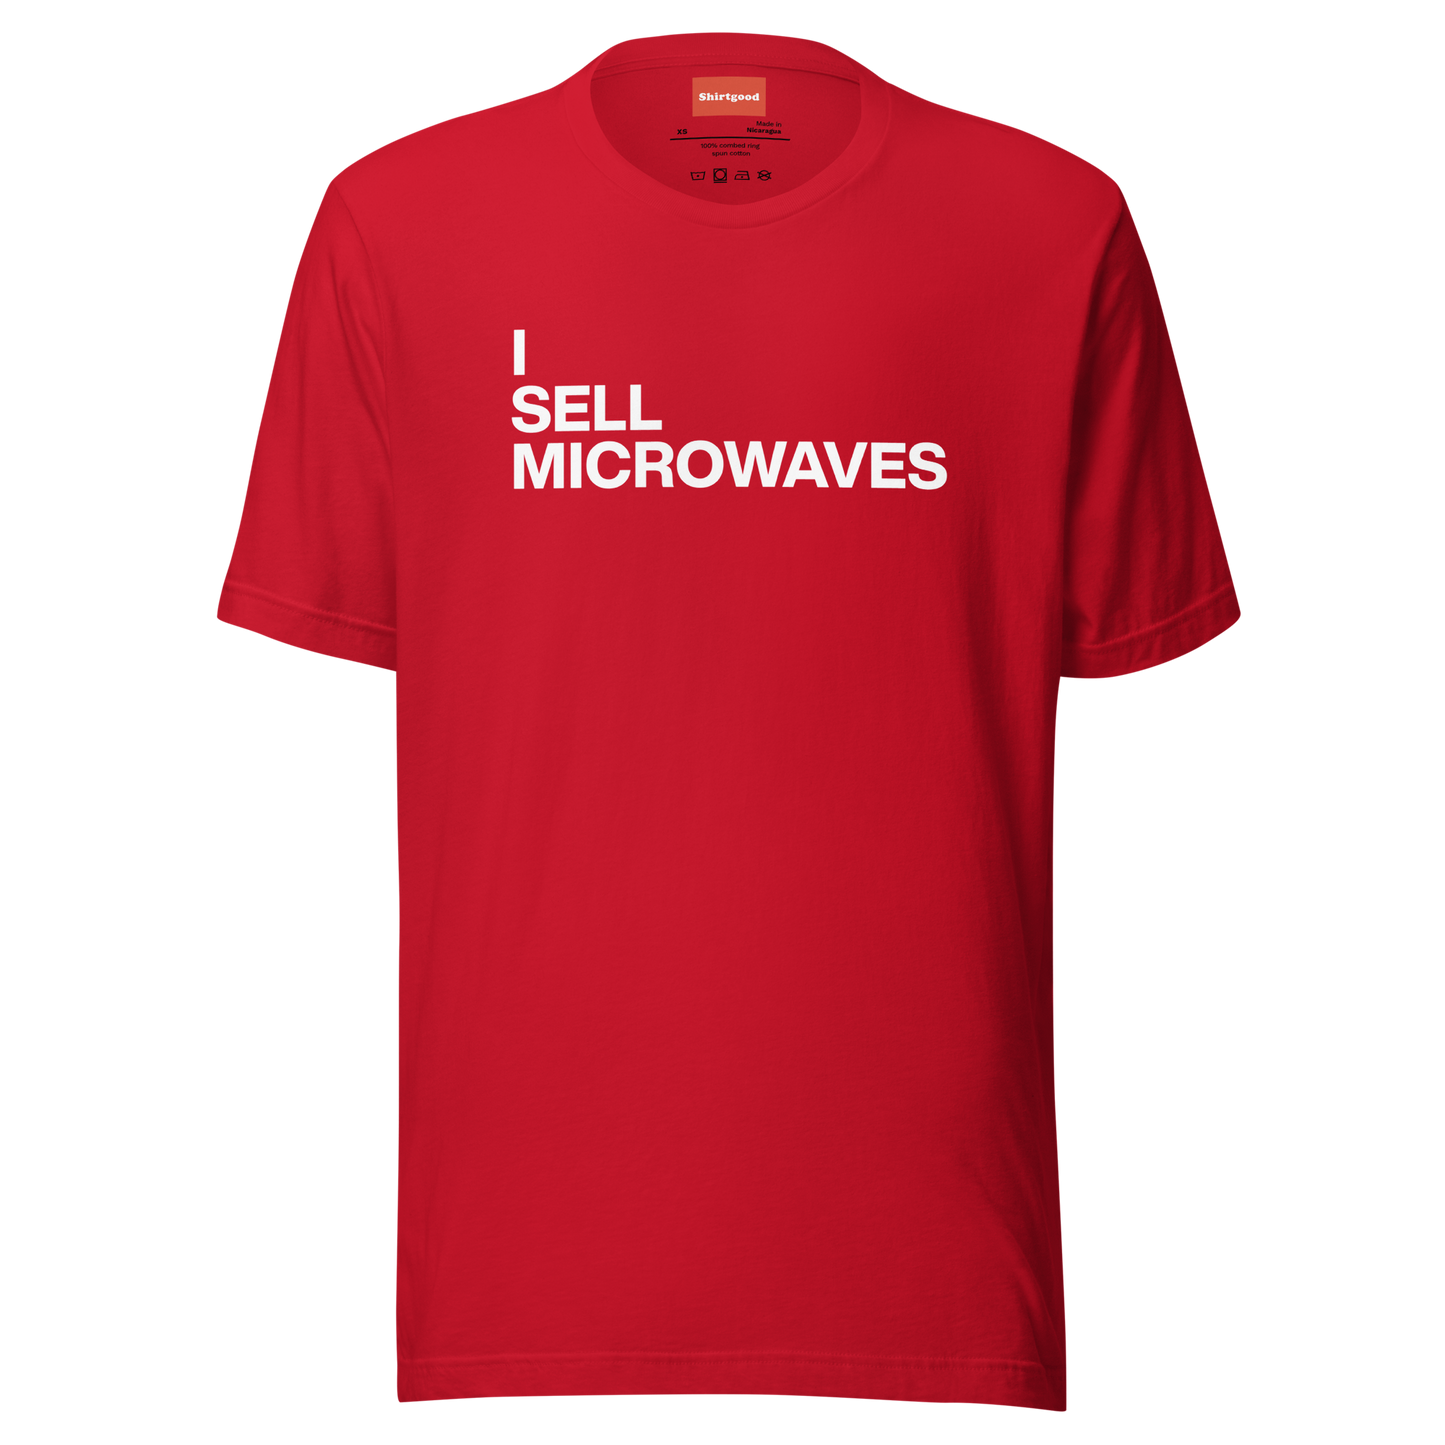 I Sell Microwaves Unisex t-shirt